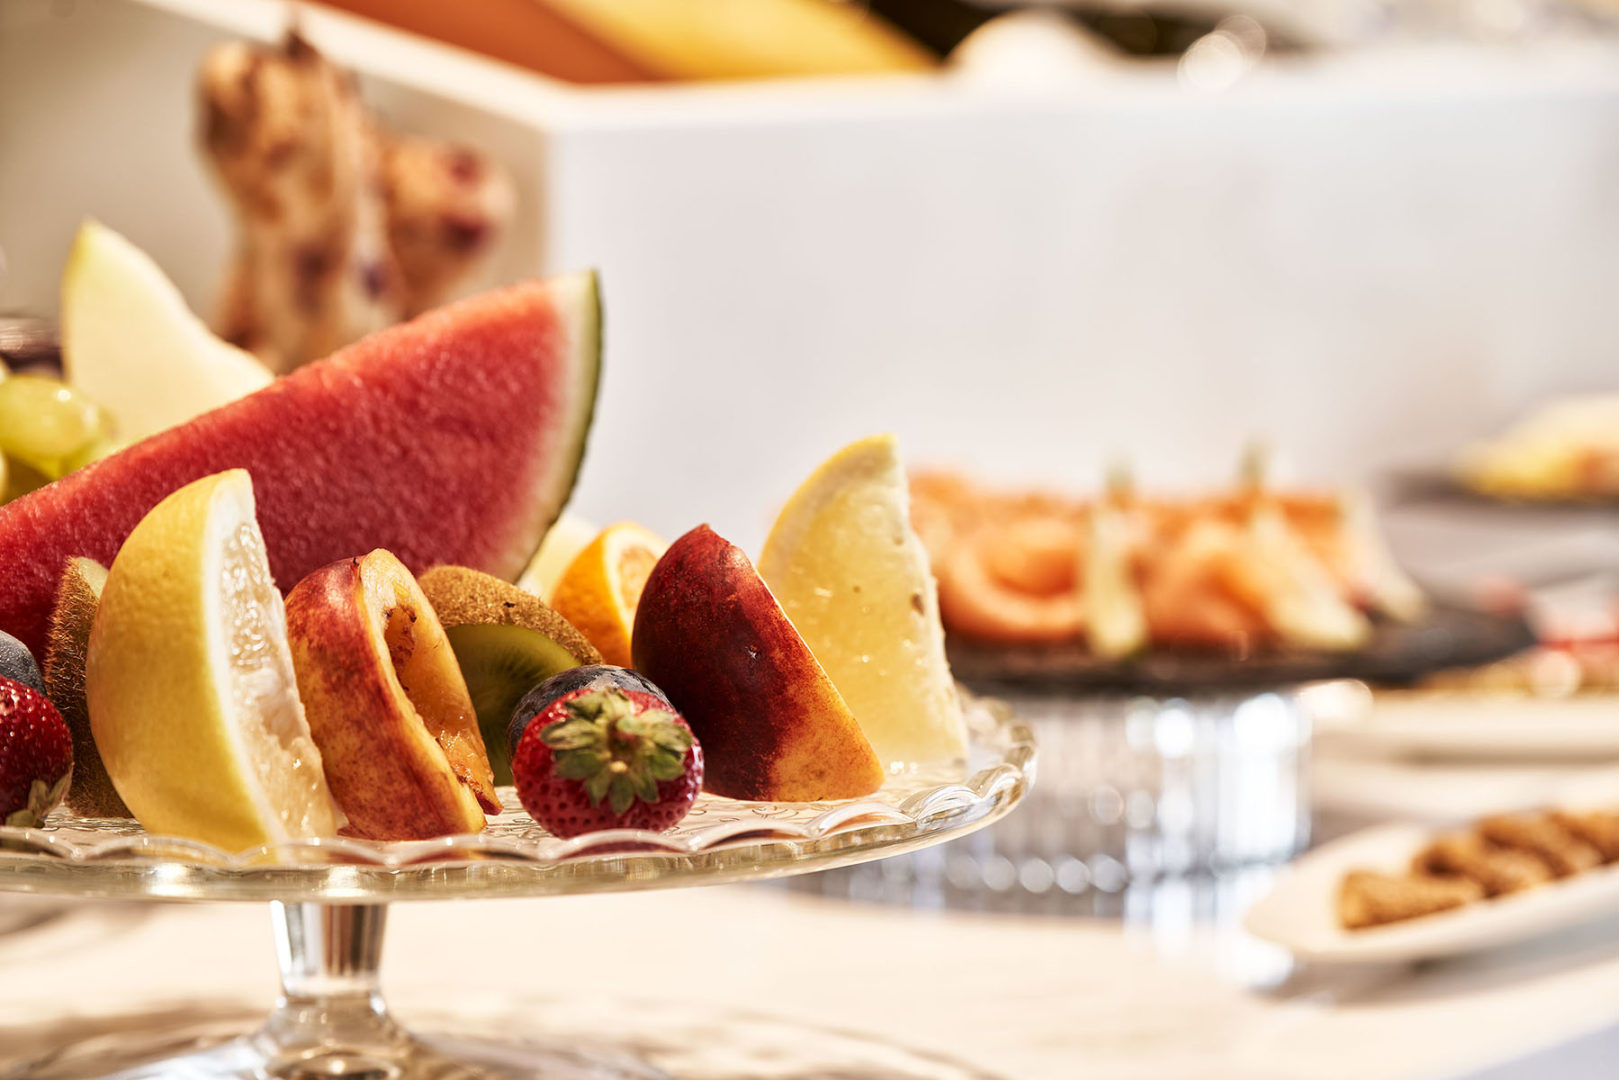 Food at Bellevue Suites ranks among the <br>most important guests experiences.